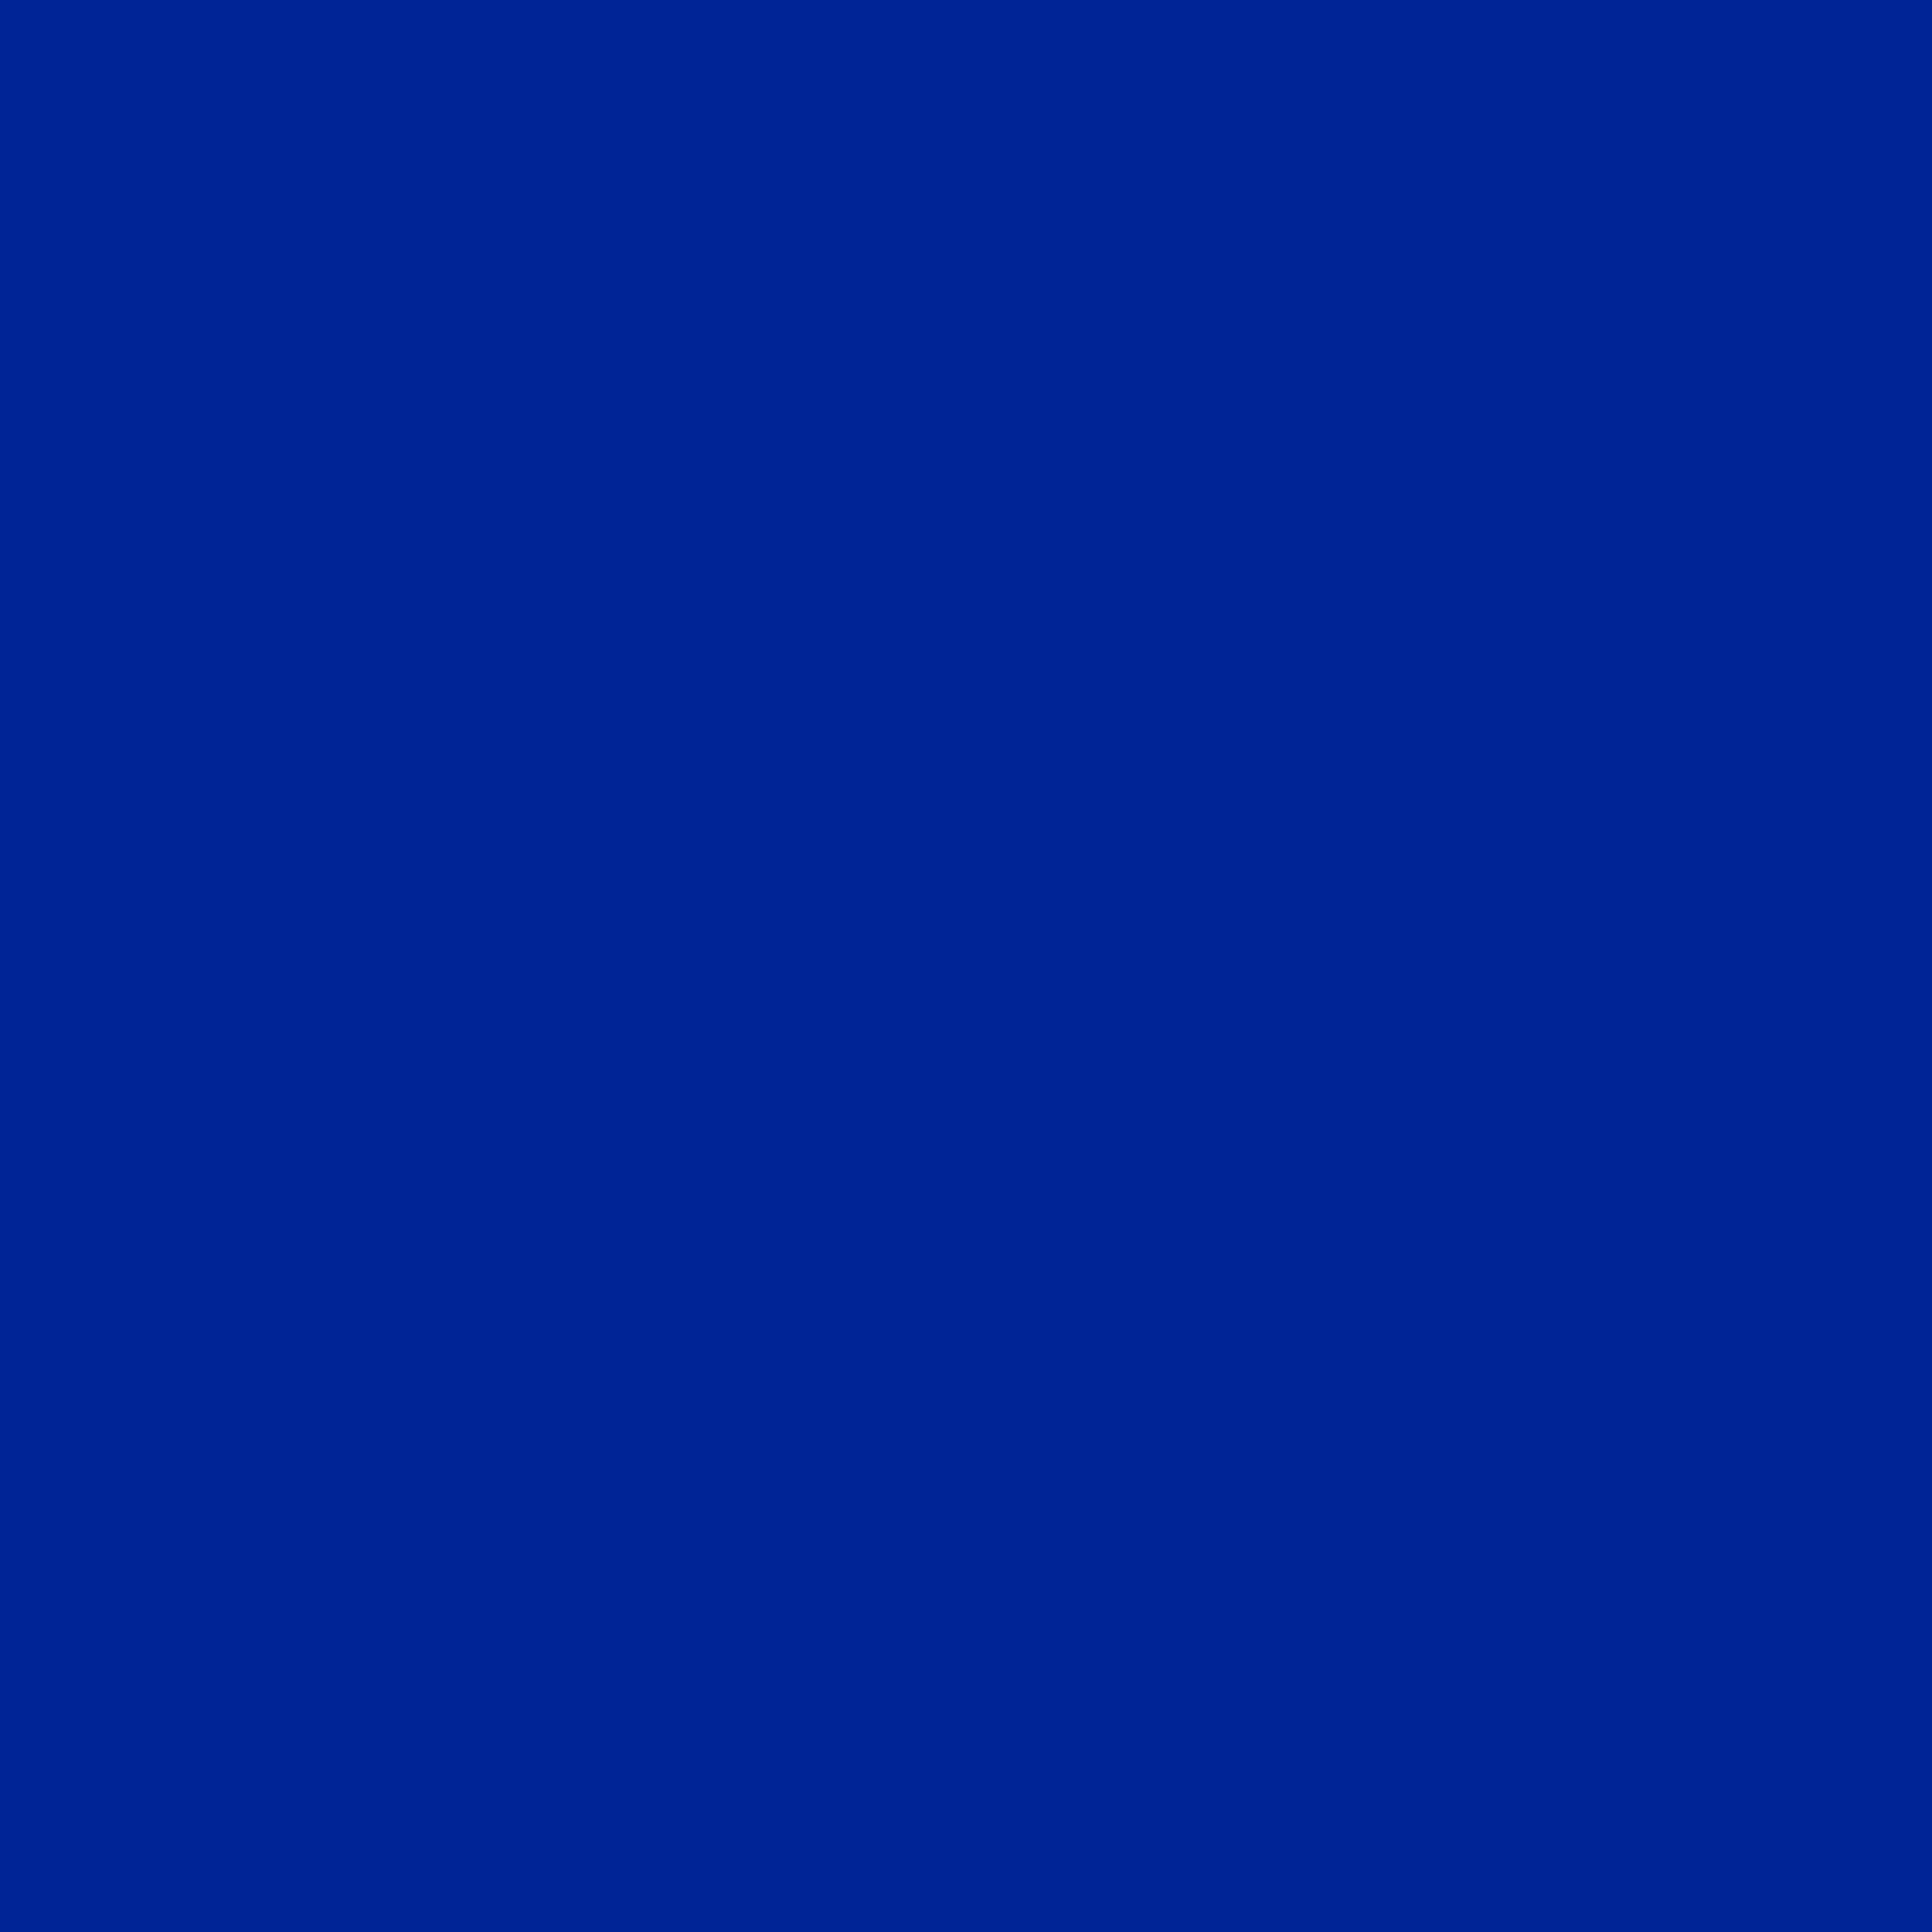 2732x2732 Imperial Blue Solid Color Background